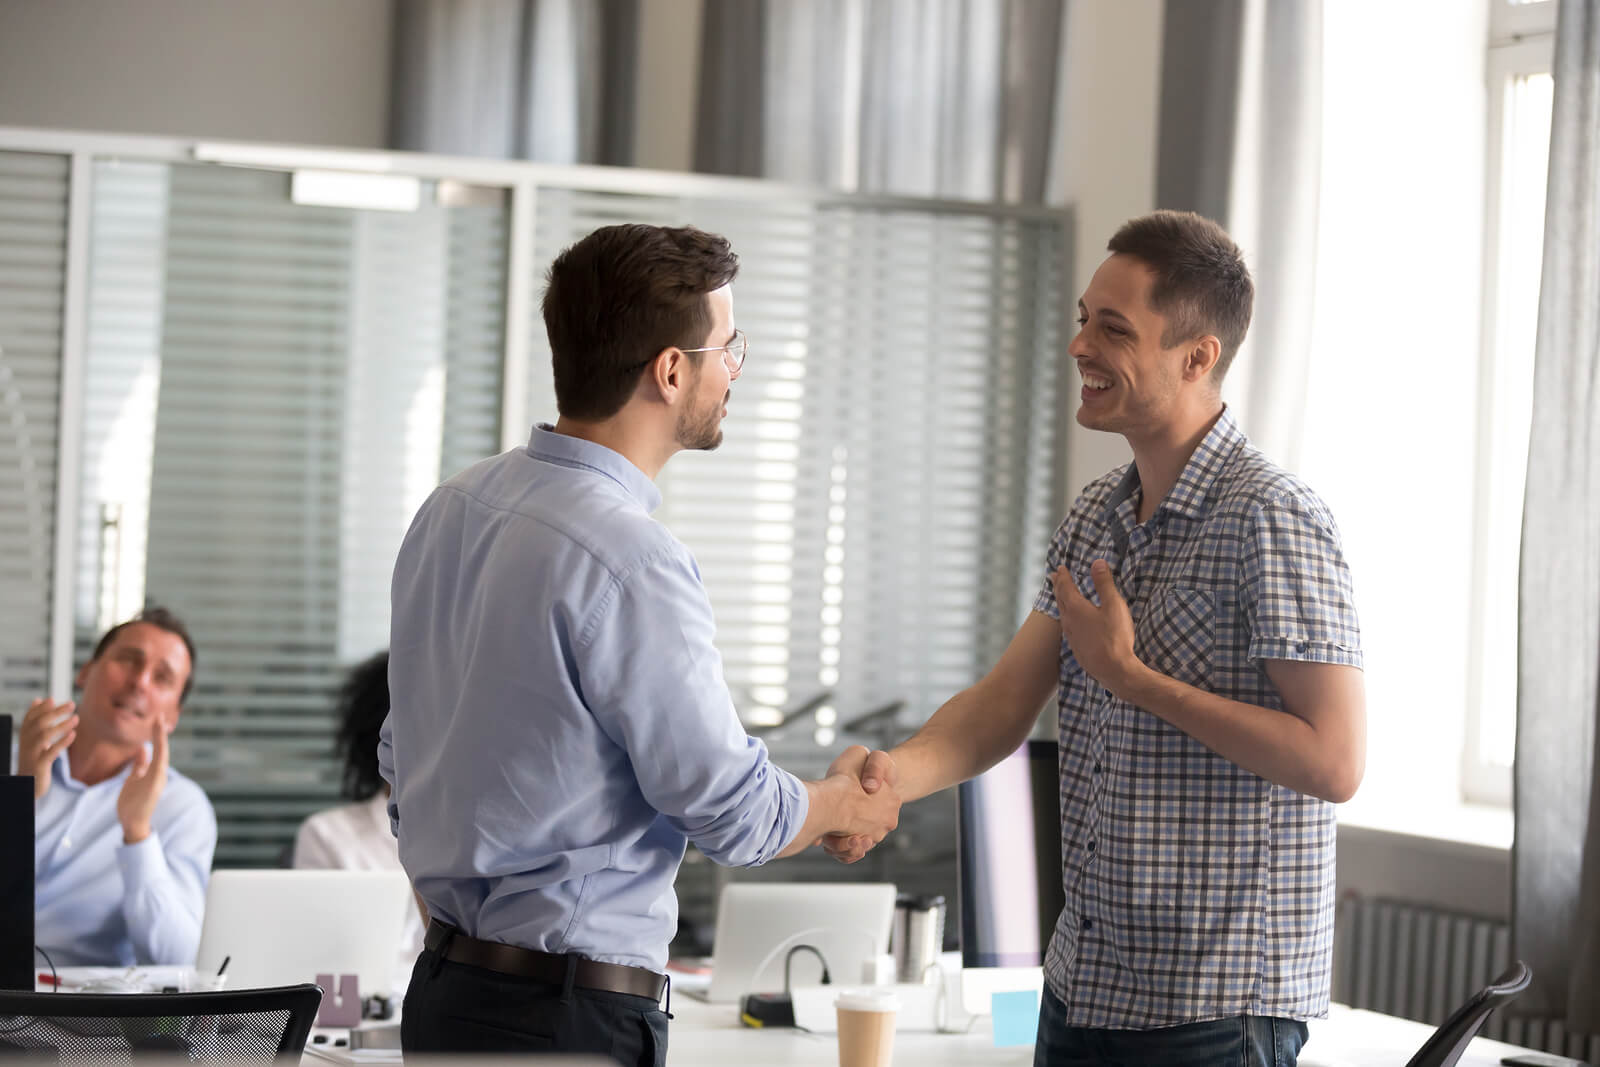 Overcoming Common Employee Relations Issues in Small Businesses